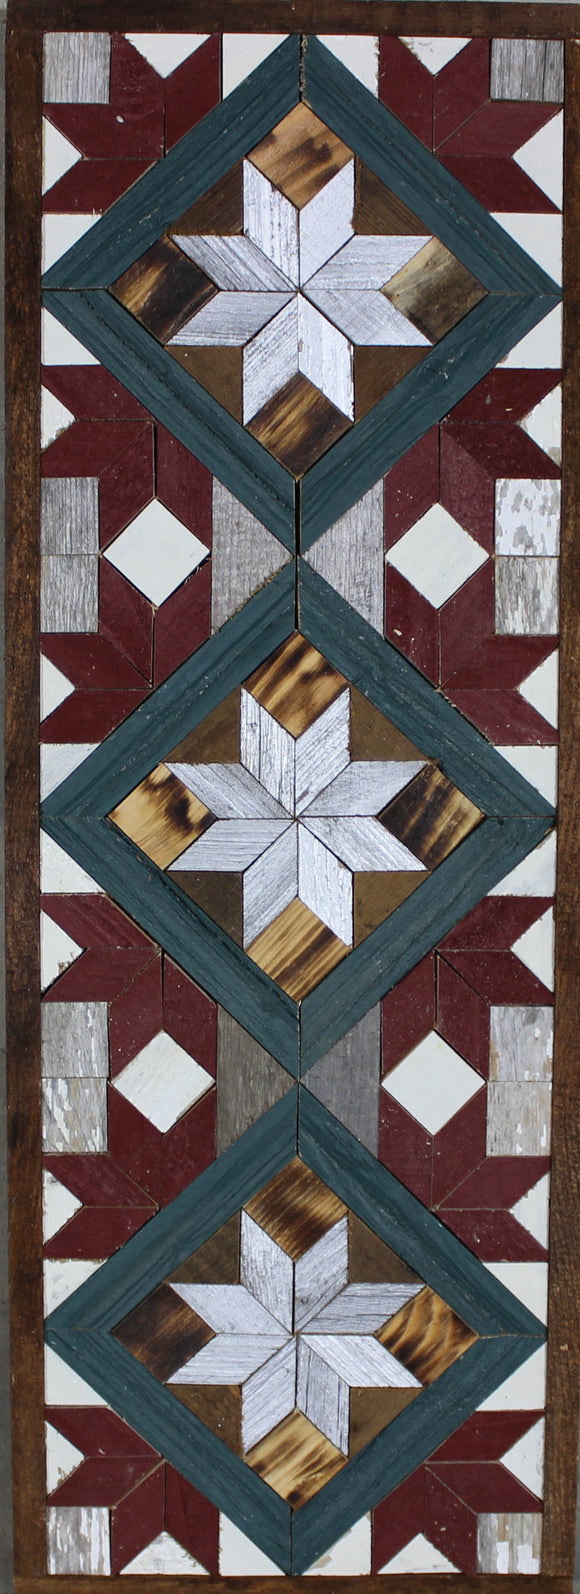 Amish Barn Quilt Wall Art, 30 by 10.5 Green Red and Silver Starburst